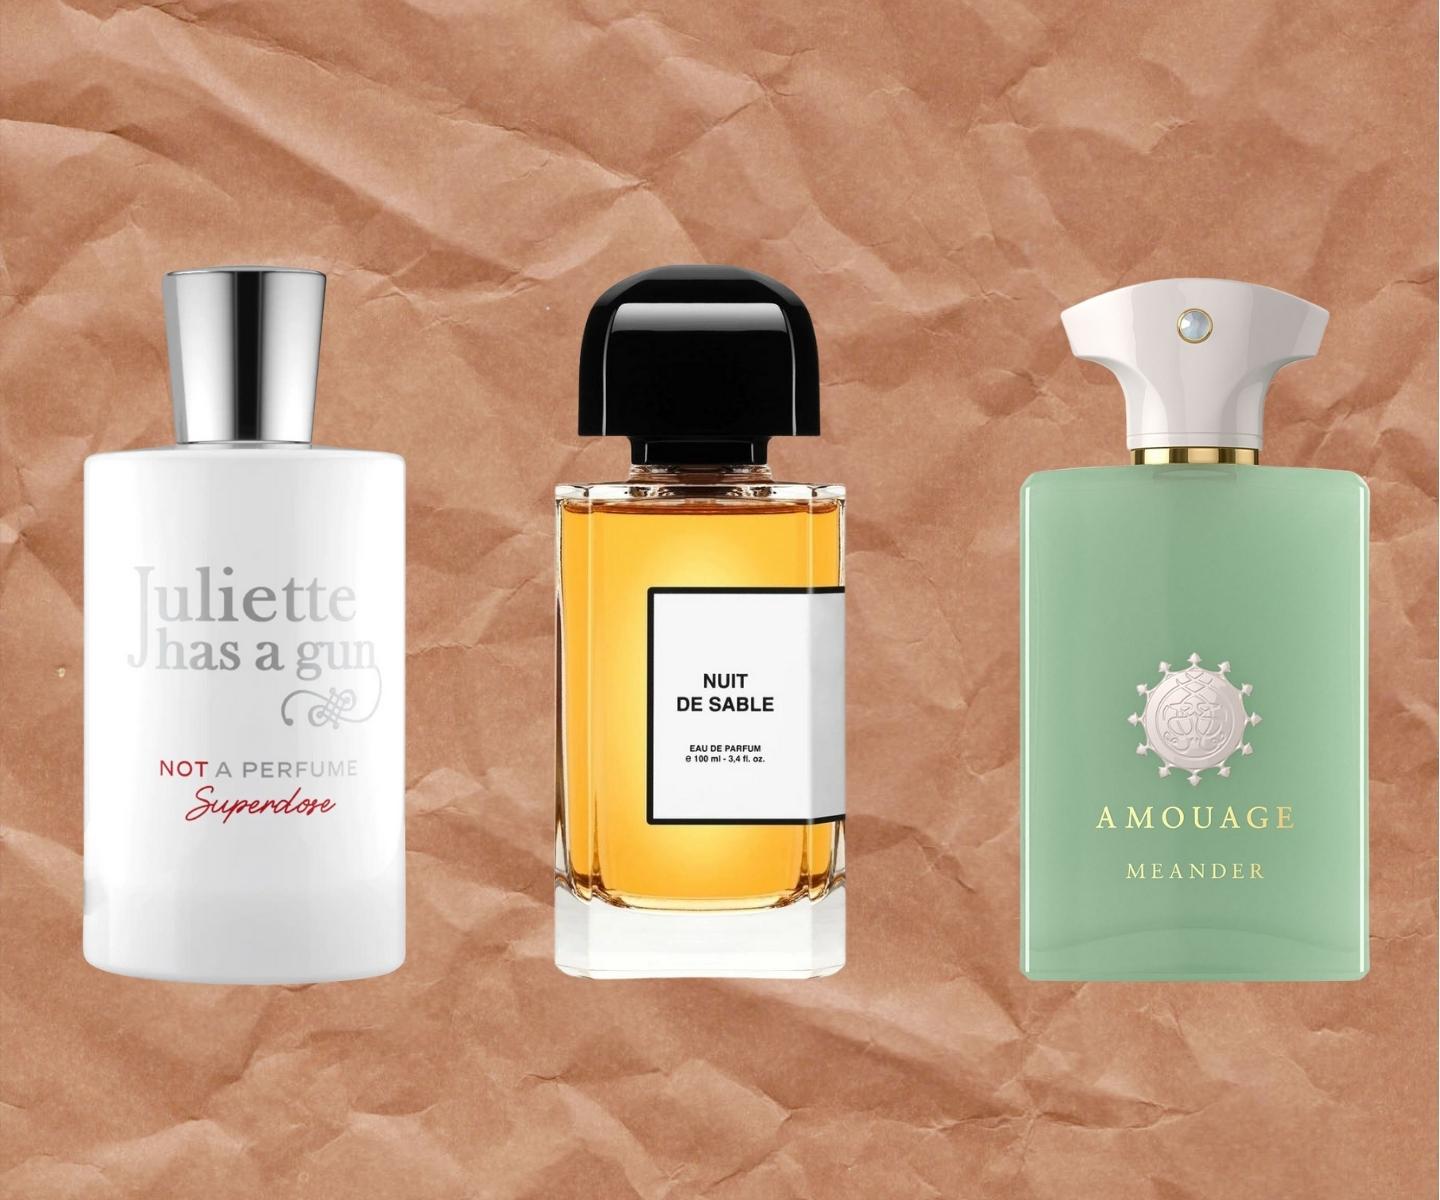 The best way to try our perfumes, and find your perfect scent